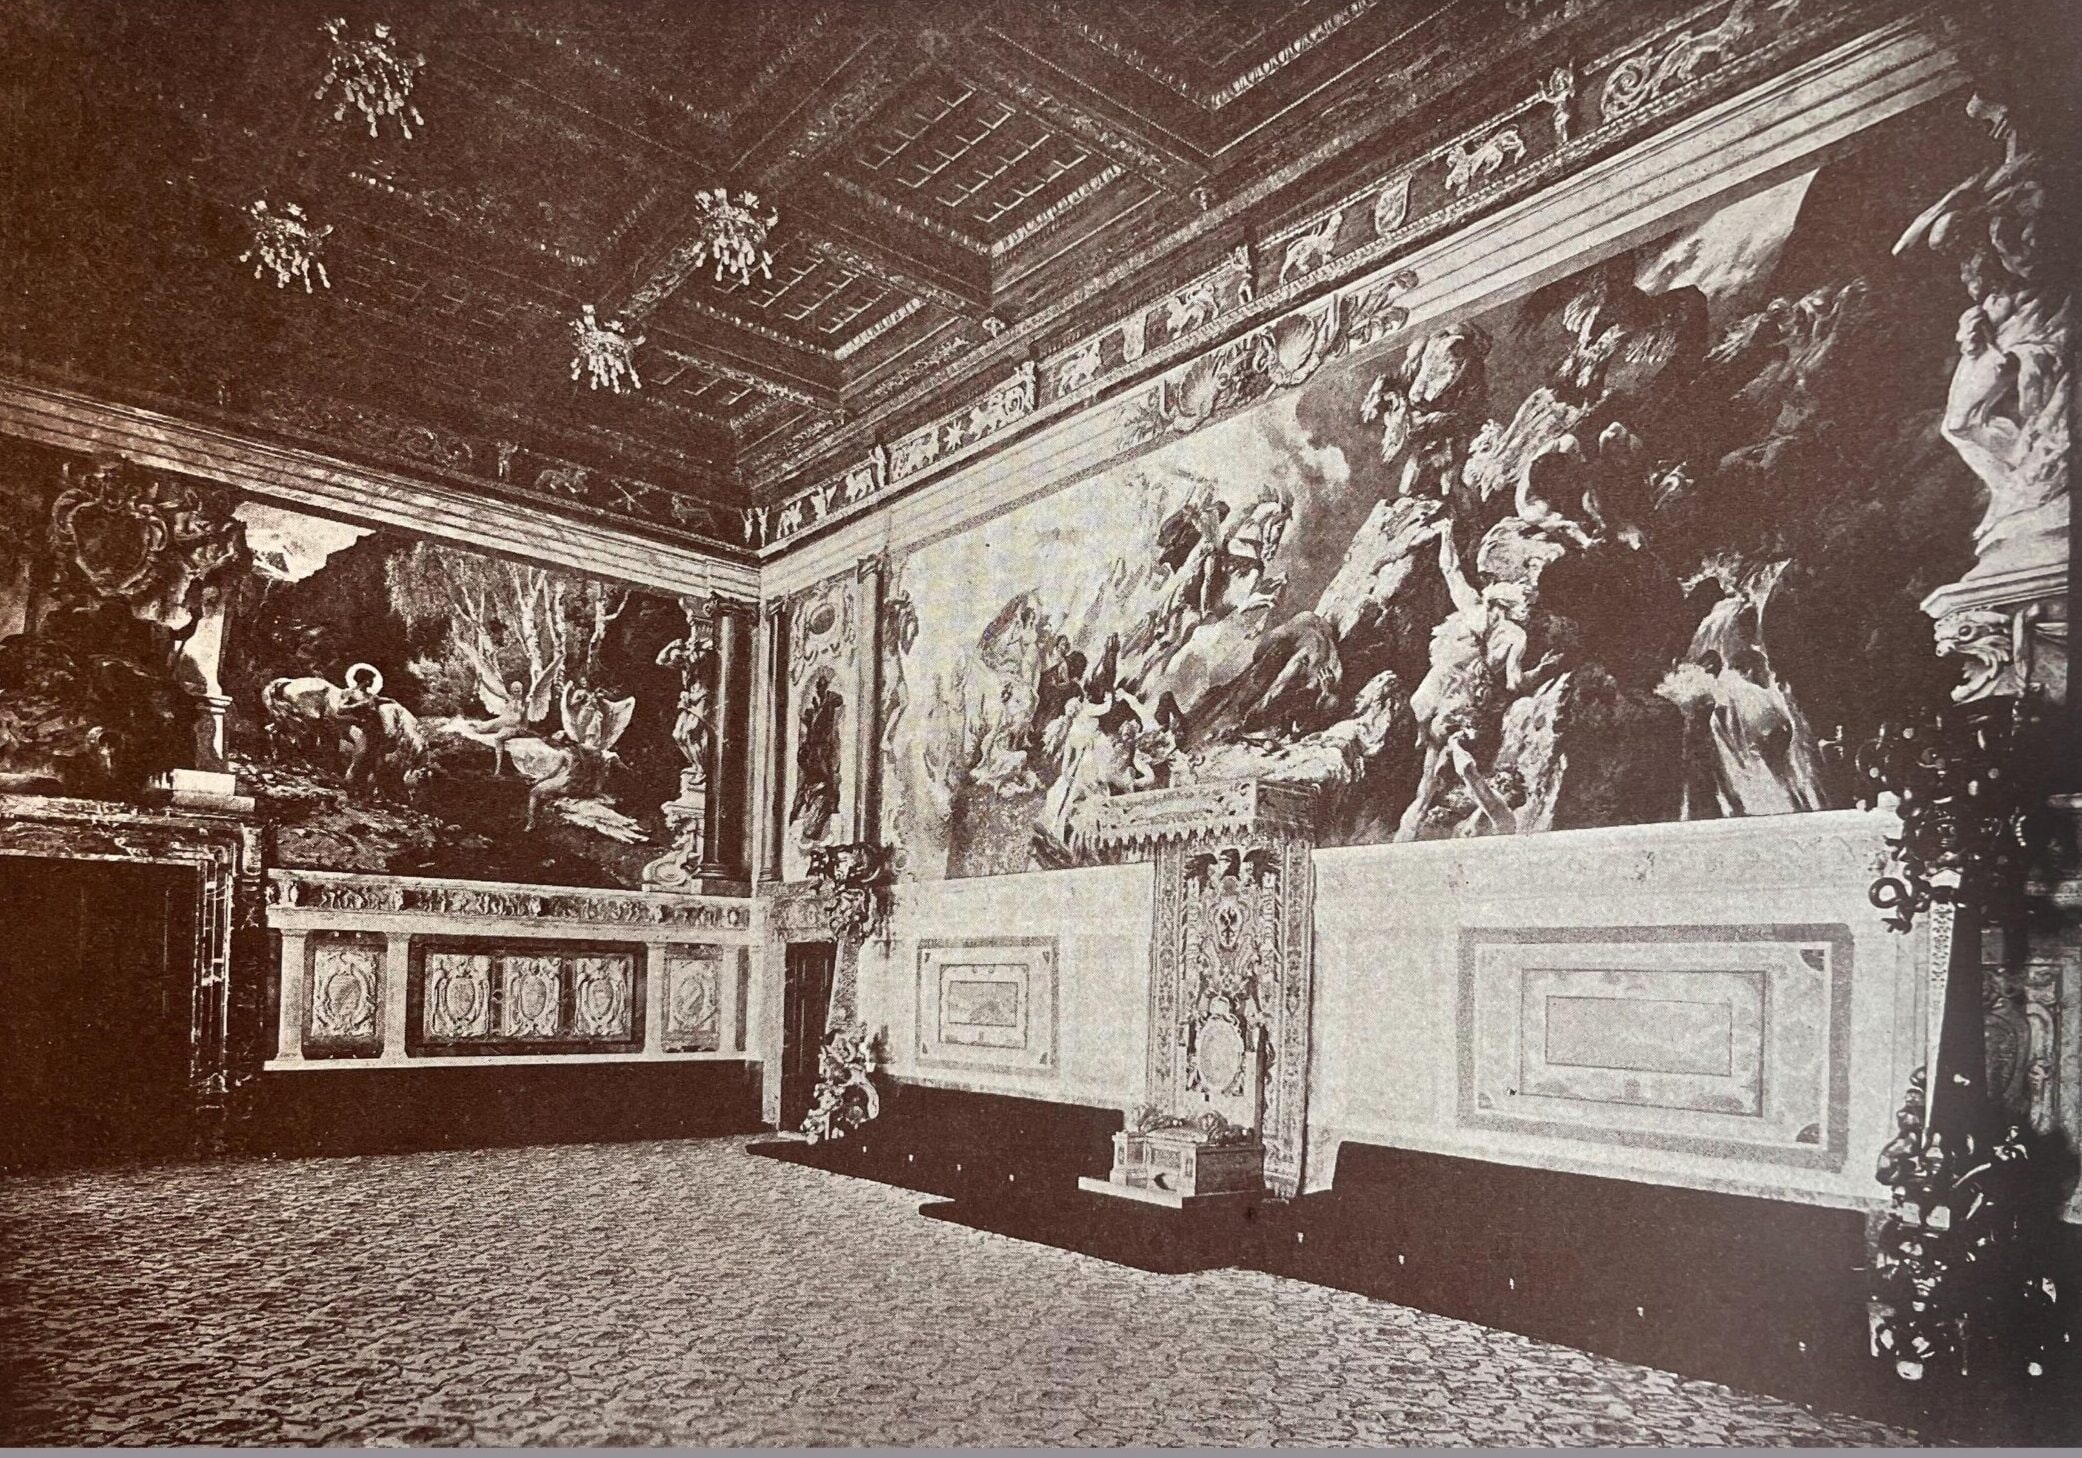 The throne room of Palazzo Caffarelli, Rome, showing the murals by Hermann Prell (1854-1922)